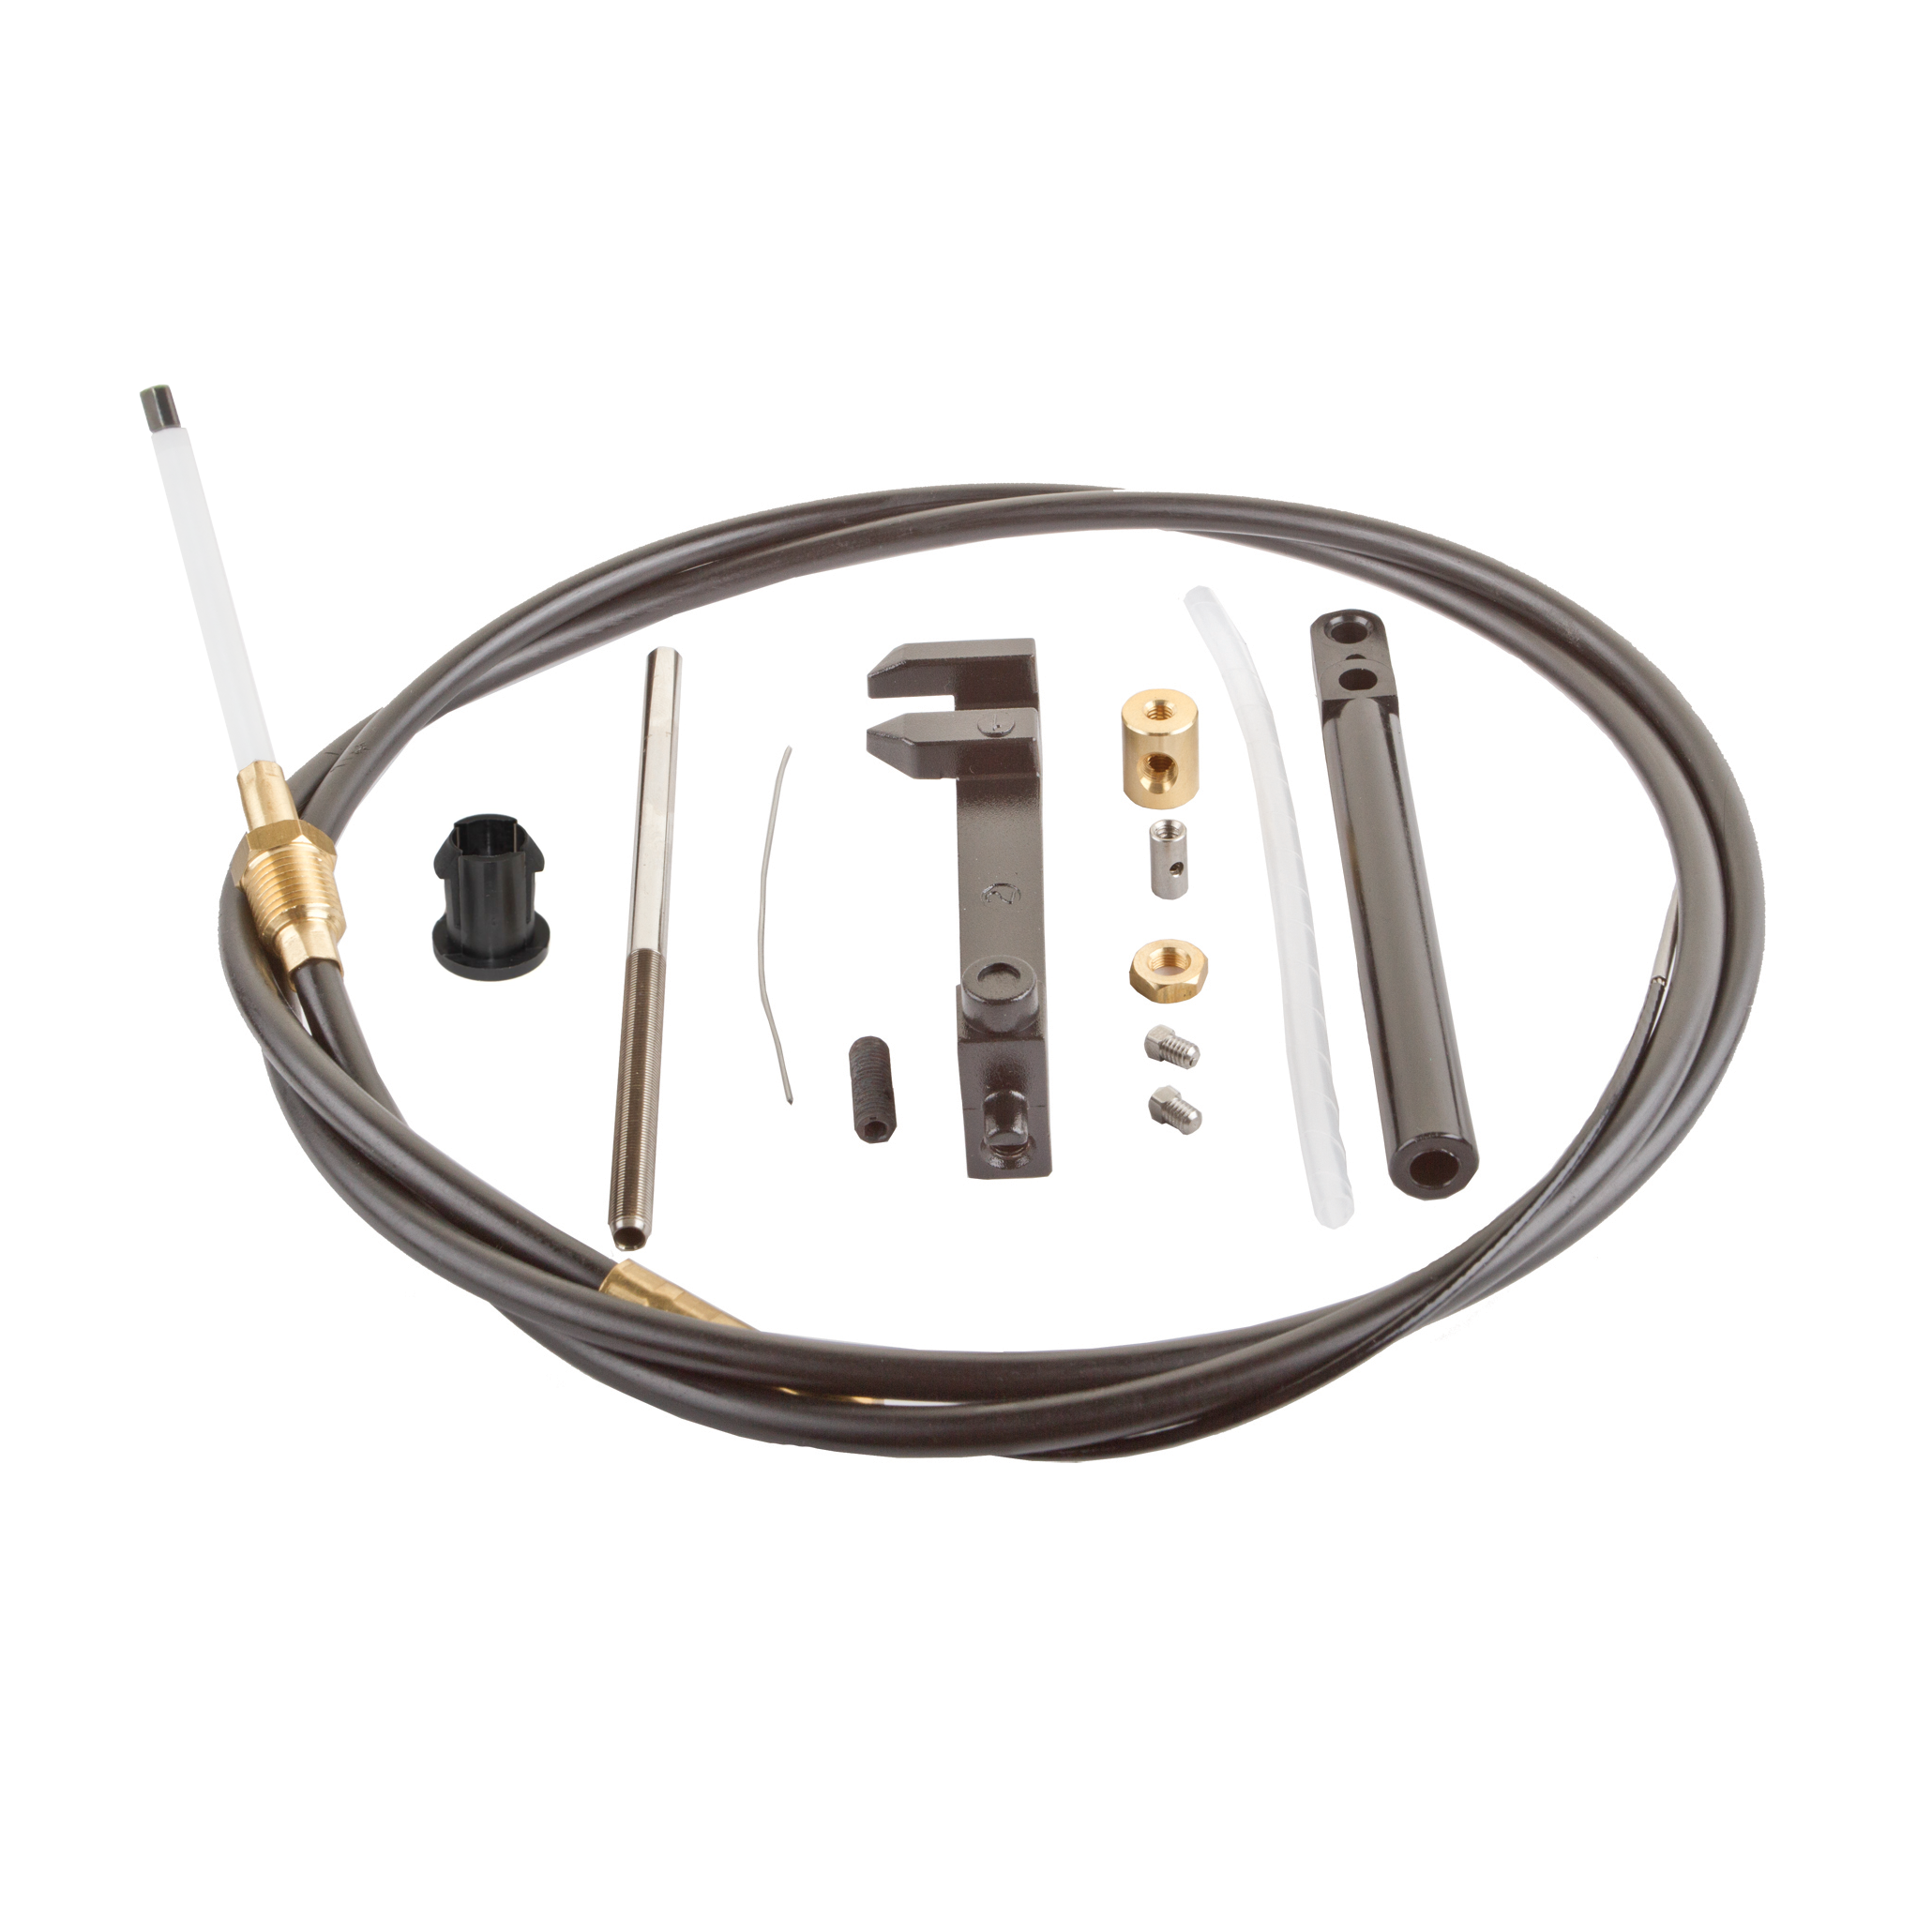 MR RANSOTO Intermediate Lower Shift Cable Kit Compatible with MerCruiser Stern Drives 1978-Up MC-I Alpha One and Alpha One Gen II Replace 865436A02 865436A03 18-2190